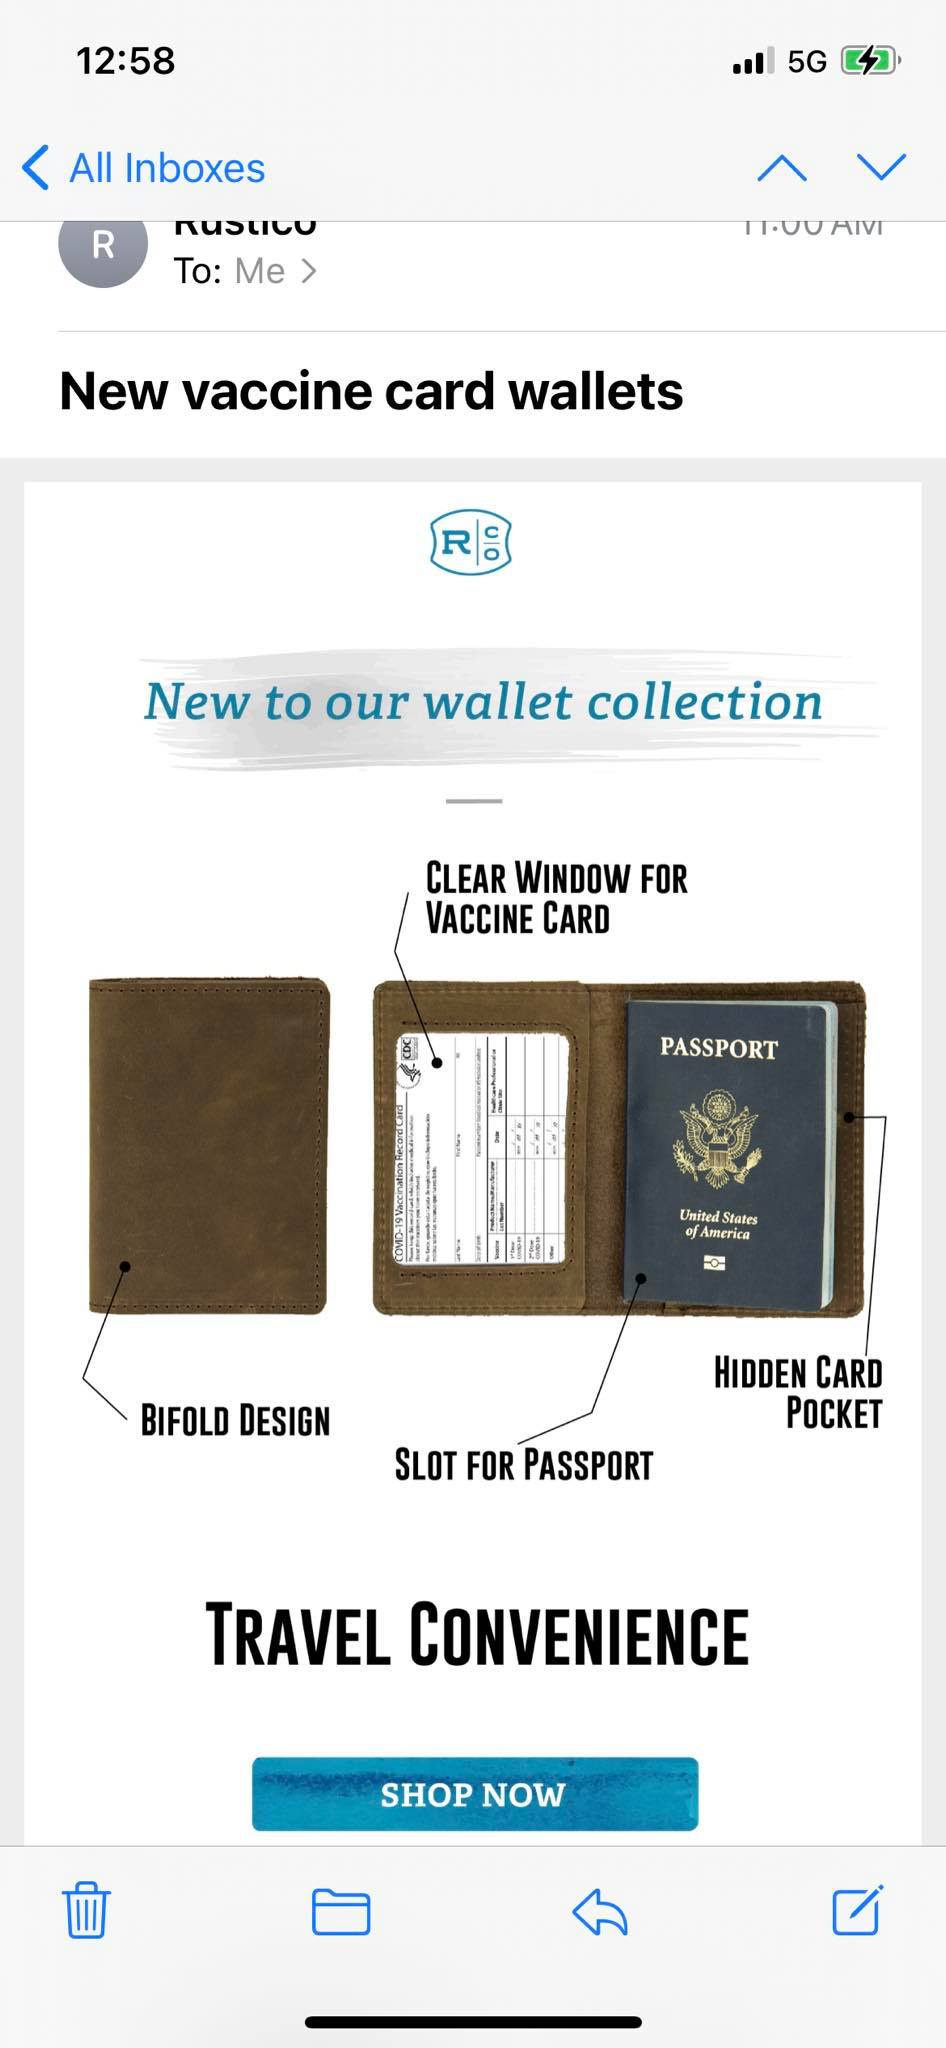 May be an image of saddle-stitched leather and text that says '12:58 5G R All Inboxes nustico To: Me 11000 New vaccine card wallets New to our wallet collection CLEAR WINDOW FOR VACCINE CARD PASSPORT UnitedState BIFOLD DESIGN HIDDEN CARD pocKeT SLOT FOR PASSPORT TRAVEL CONVENIENCE SHOP NOW'